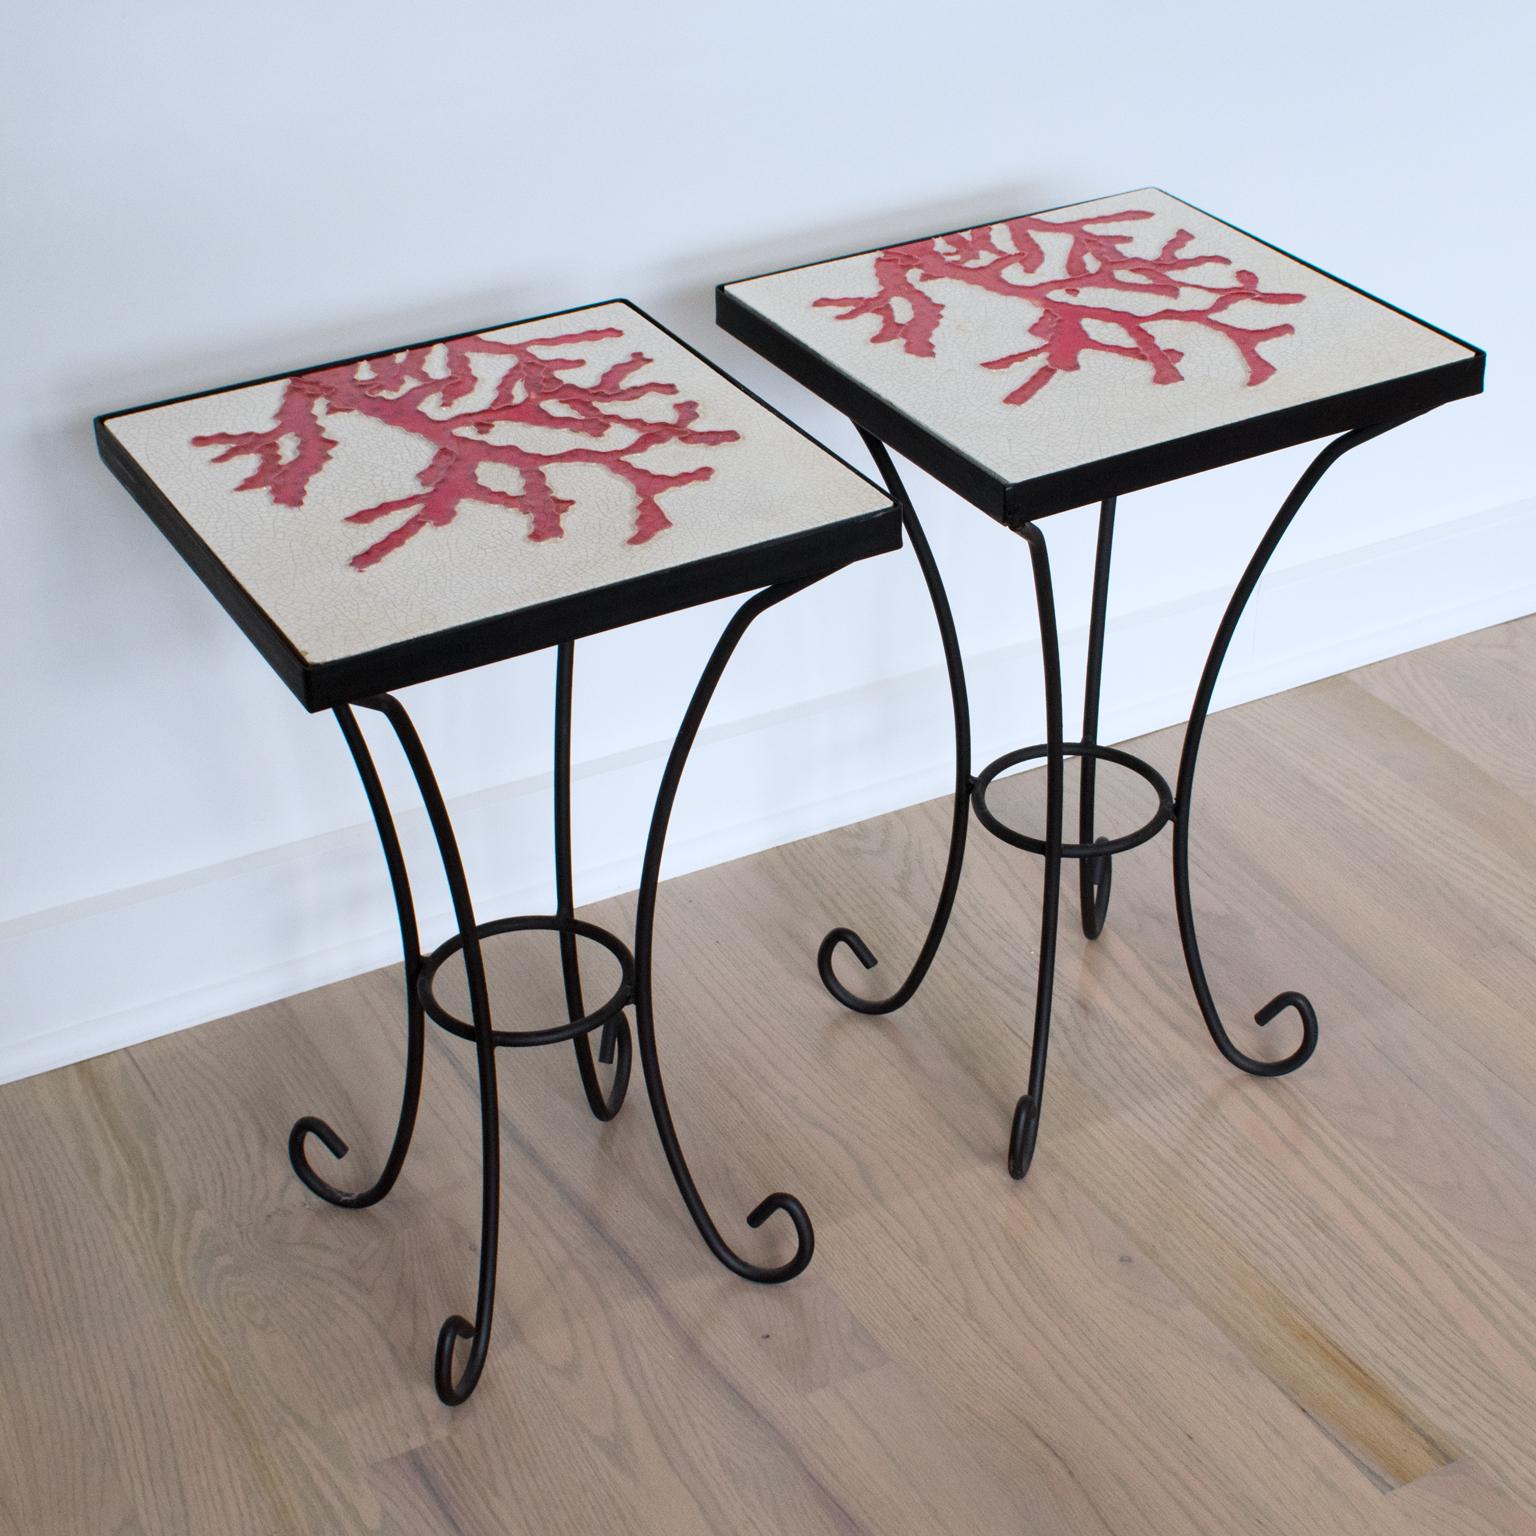 Wrought Iron and Ceramic Tile Side Coffee Table, a pair, 1950s For Sale 5